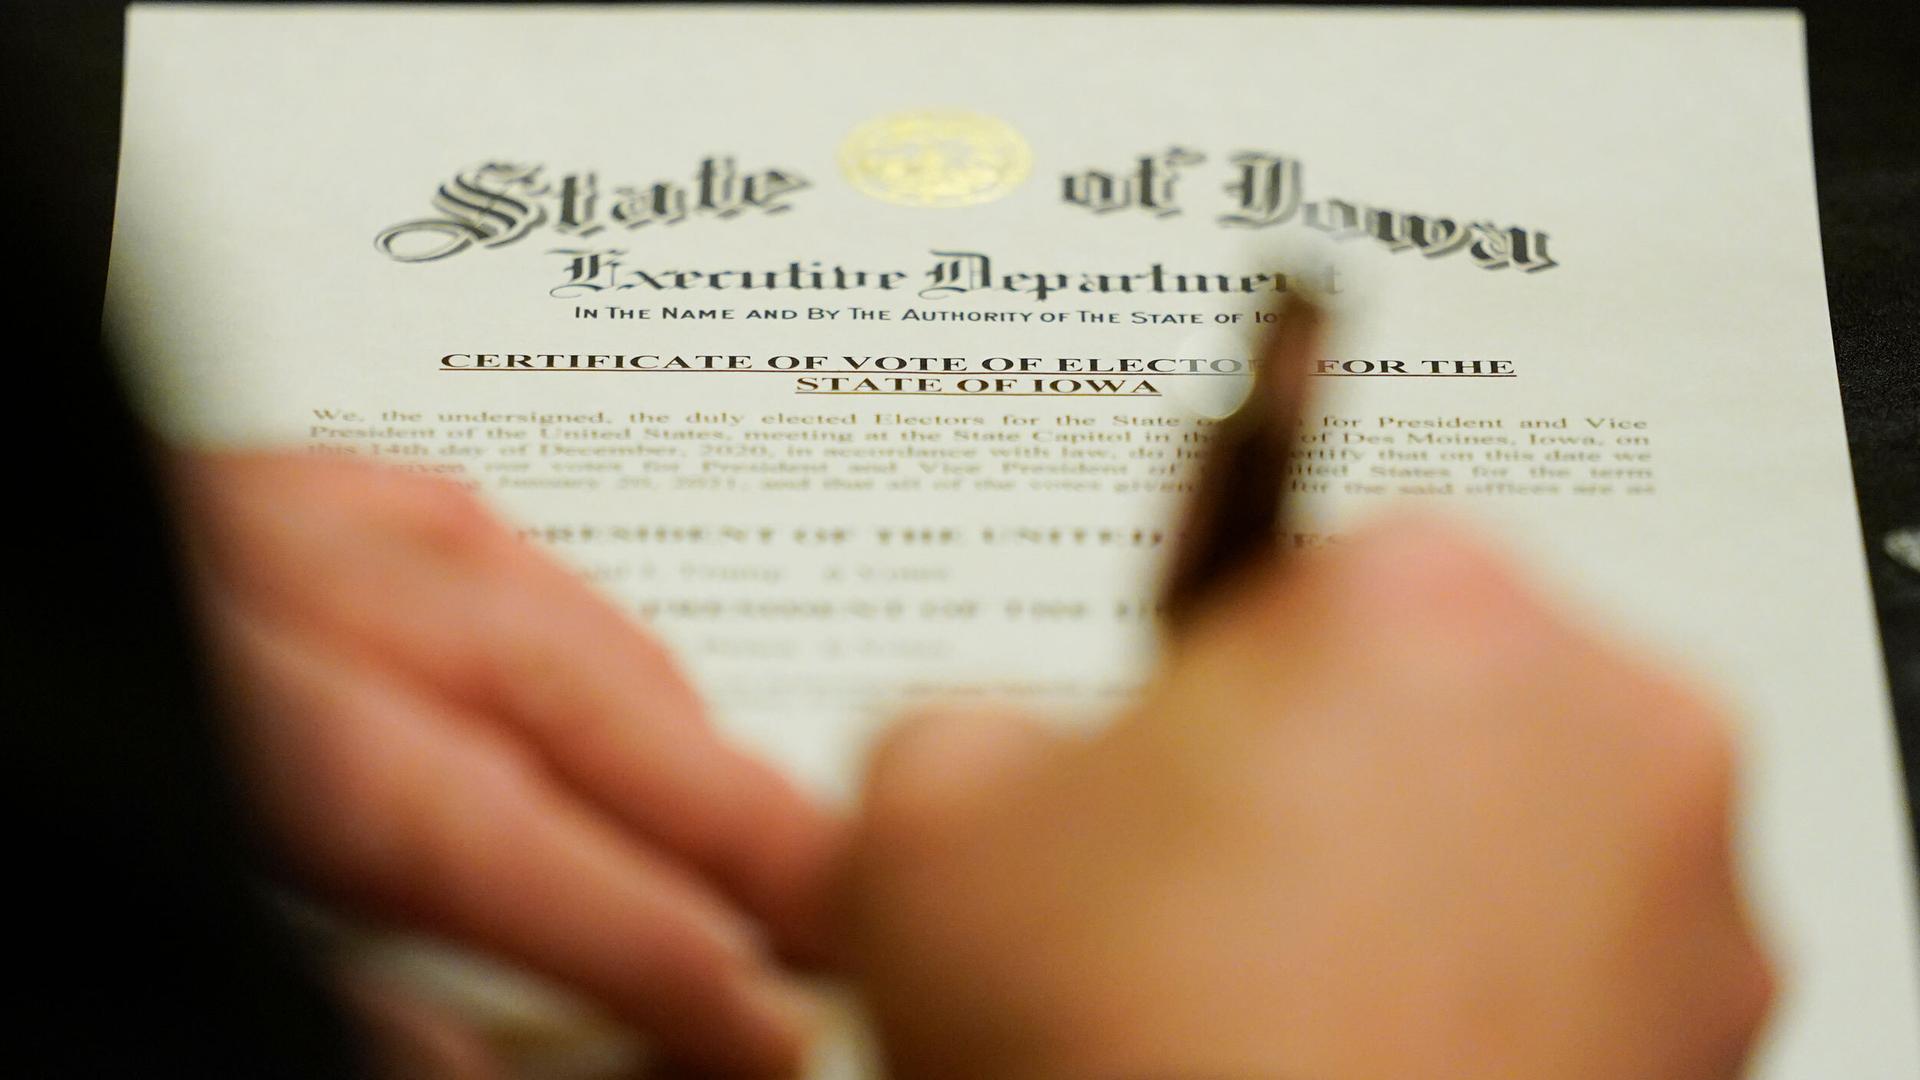 A member of Iowa's Electoral College signs the Certificate of Vote of Electors for the State of Iowa at the Statehouse in Des Moines, Iowa, Dec. 14, 2020.